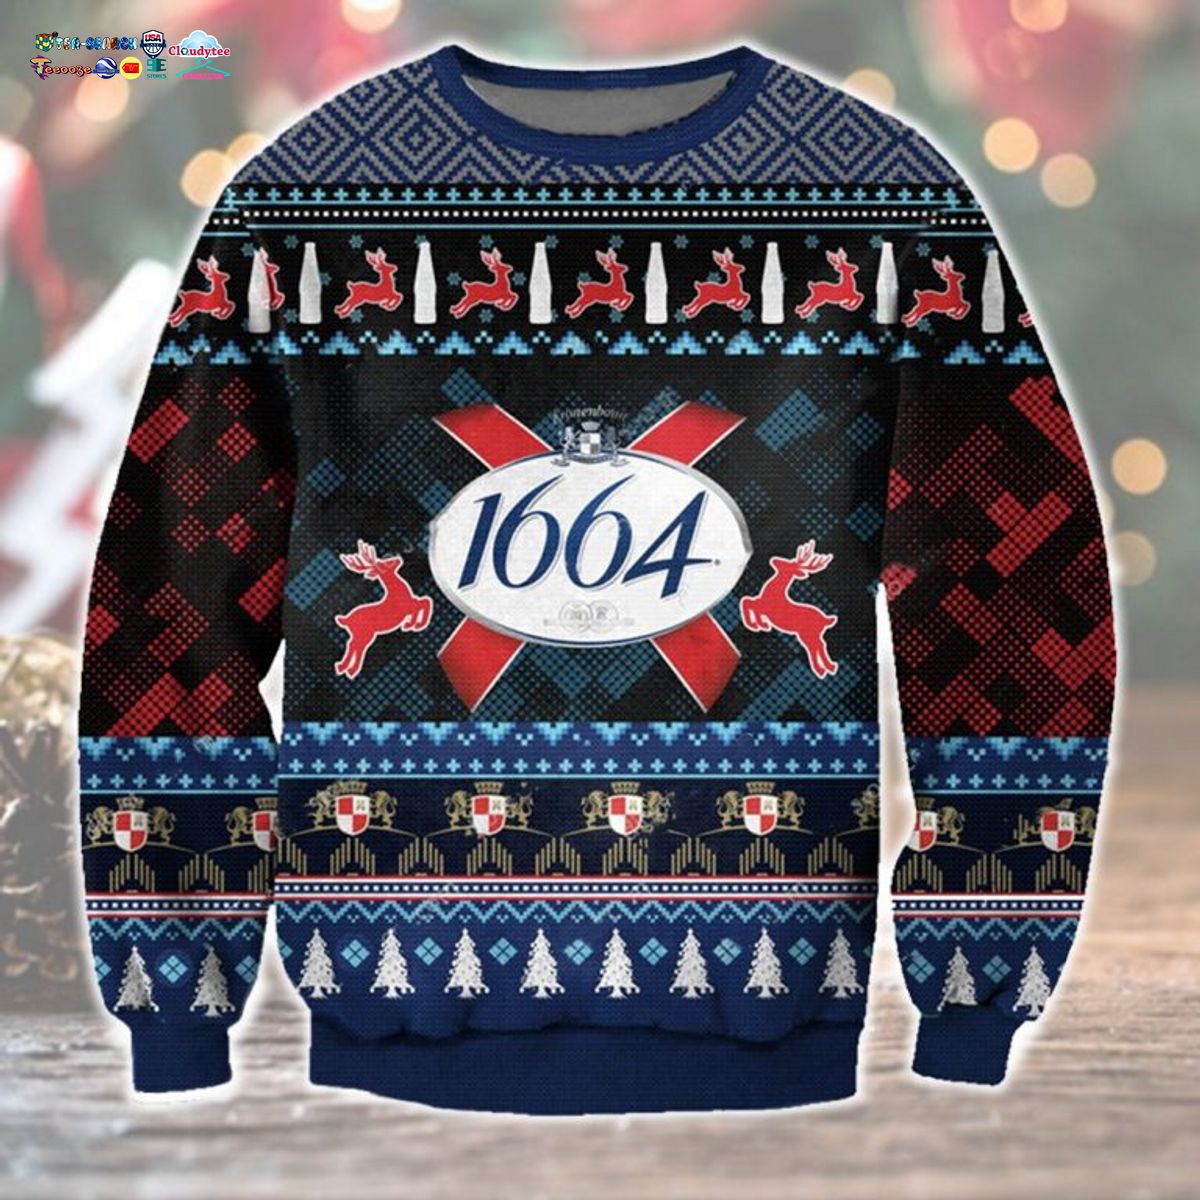 Kronenbourg 1664 Ugly Christmas Sweater - You are always amazing